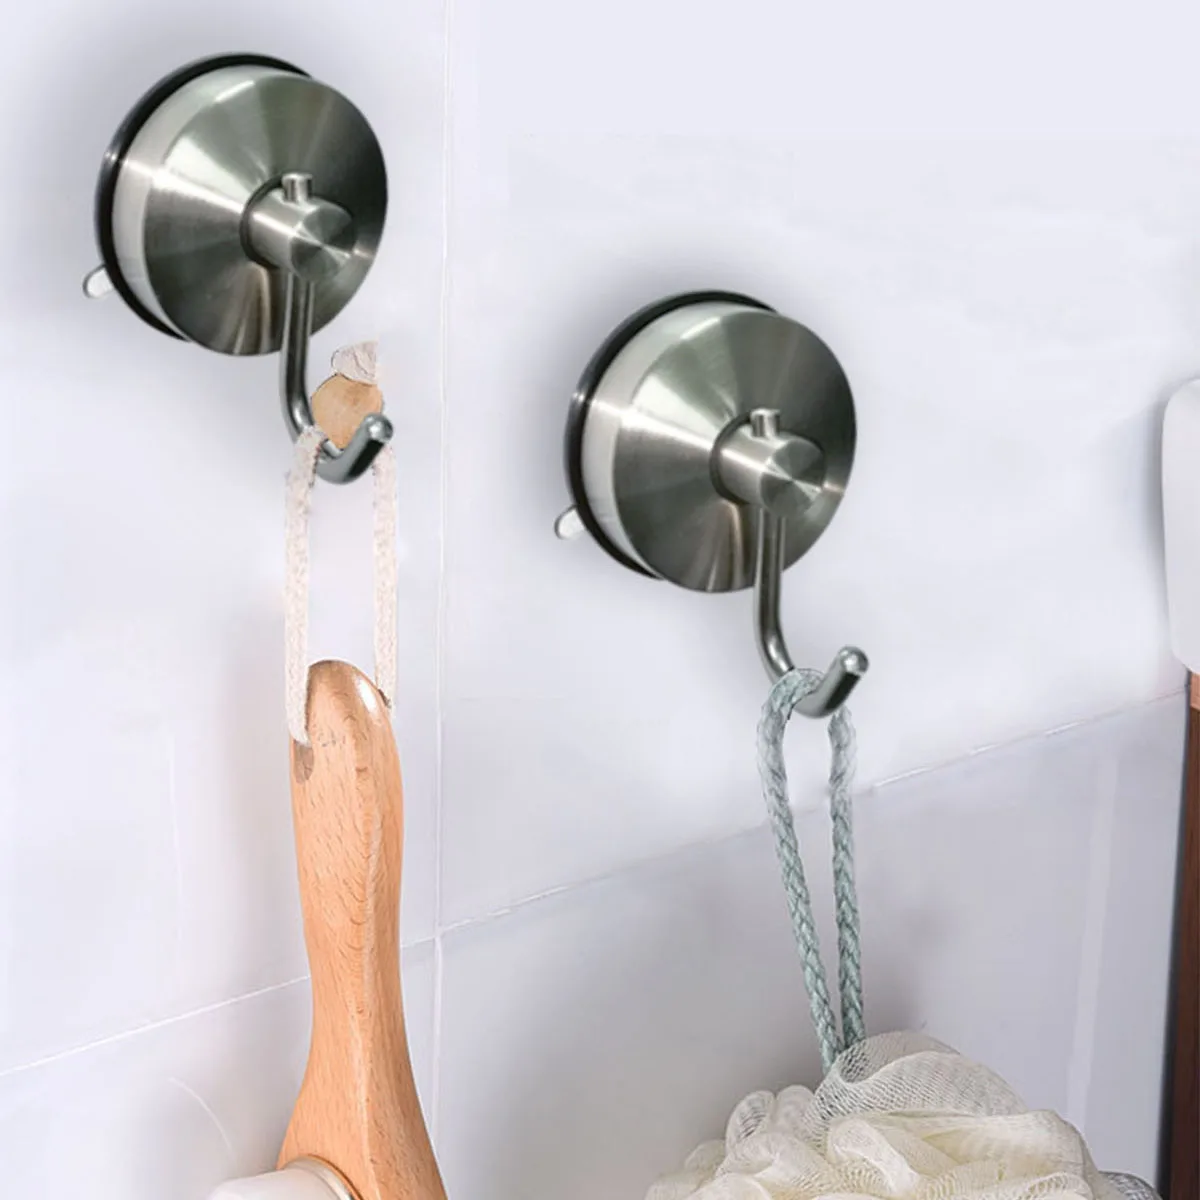 Suction Cup Hooks Stainless Steel 2 Pack Shower Hook Wall Hook Removable for Bathroom Kitchen Bedroom Hotel Brushed Finished